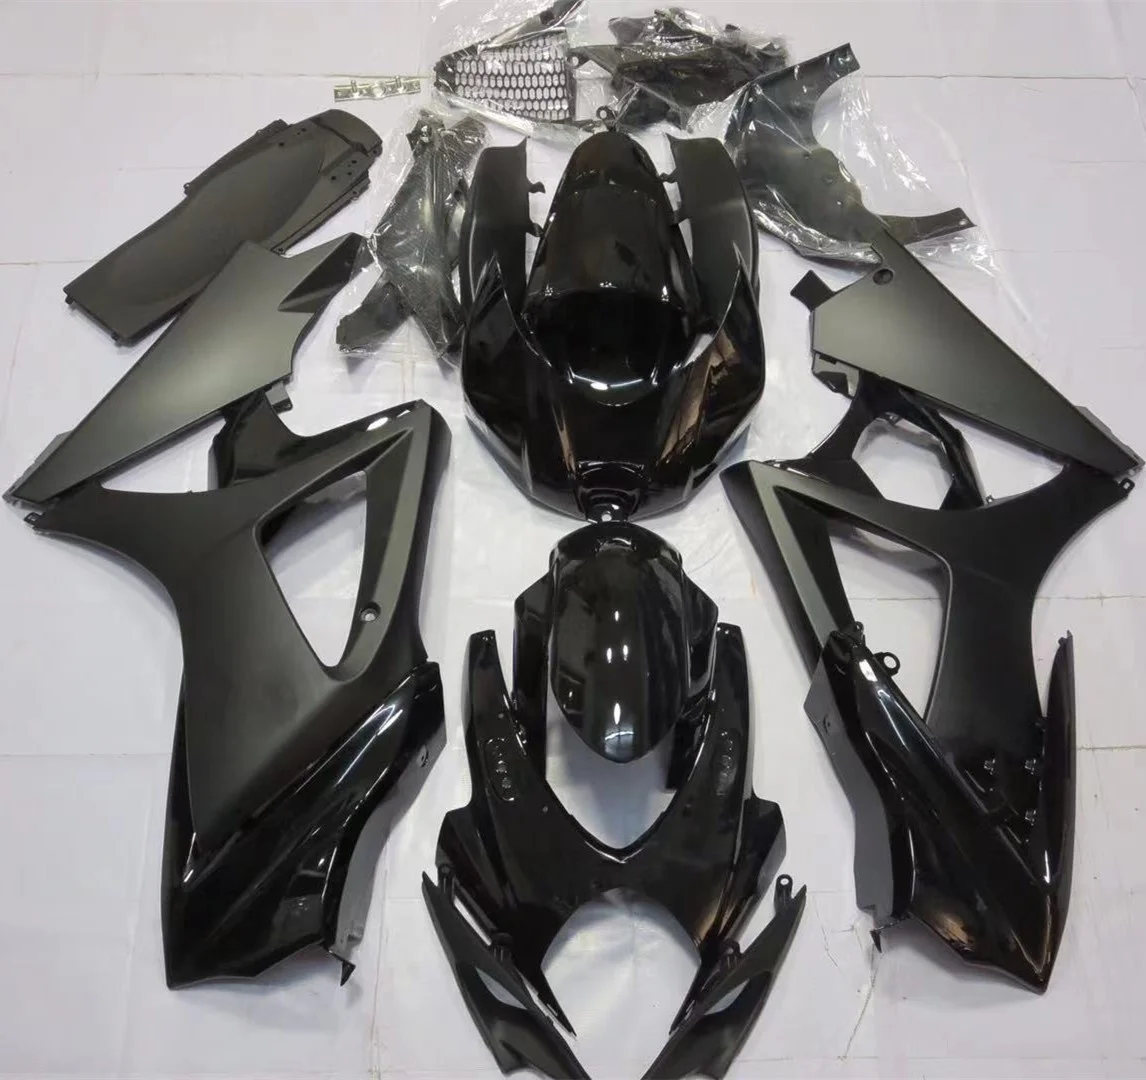 

2022 WHSC Full Motorcycle Fairings Fit For SUZUKI GSXR1000 2007-2008 ABS Plastic Body Work Black, Pictures shown